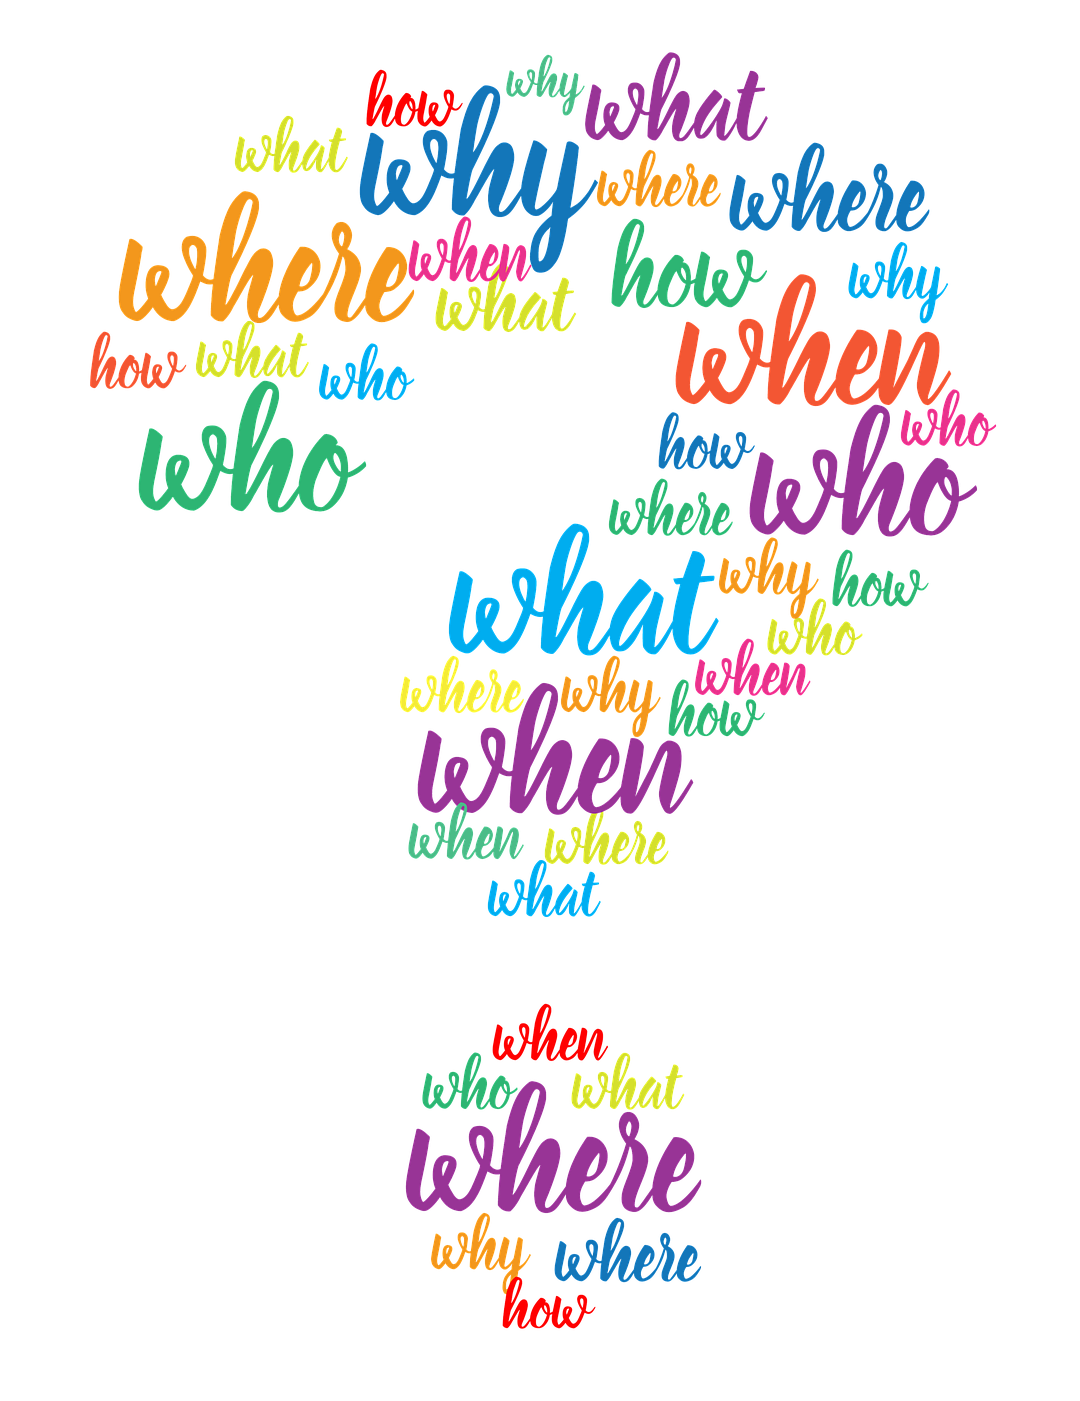 a stylized question mark made from the words who, what, where, when, why and how